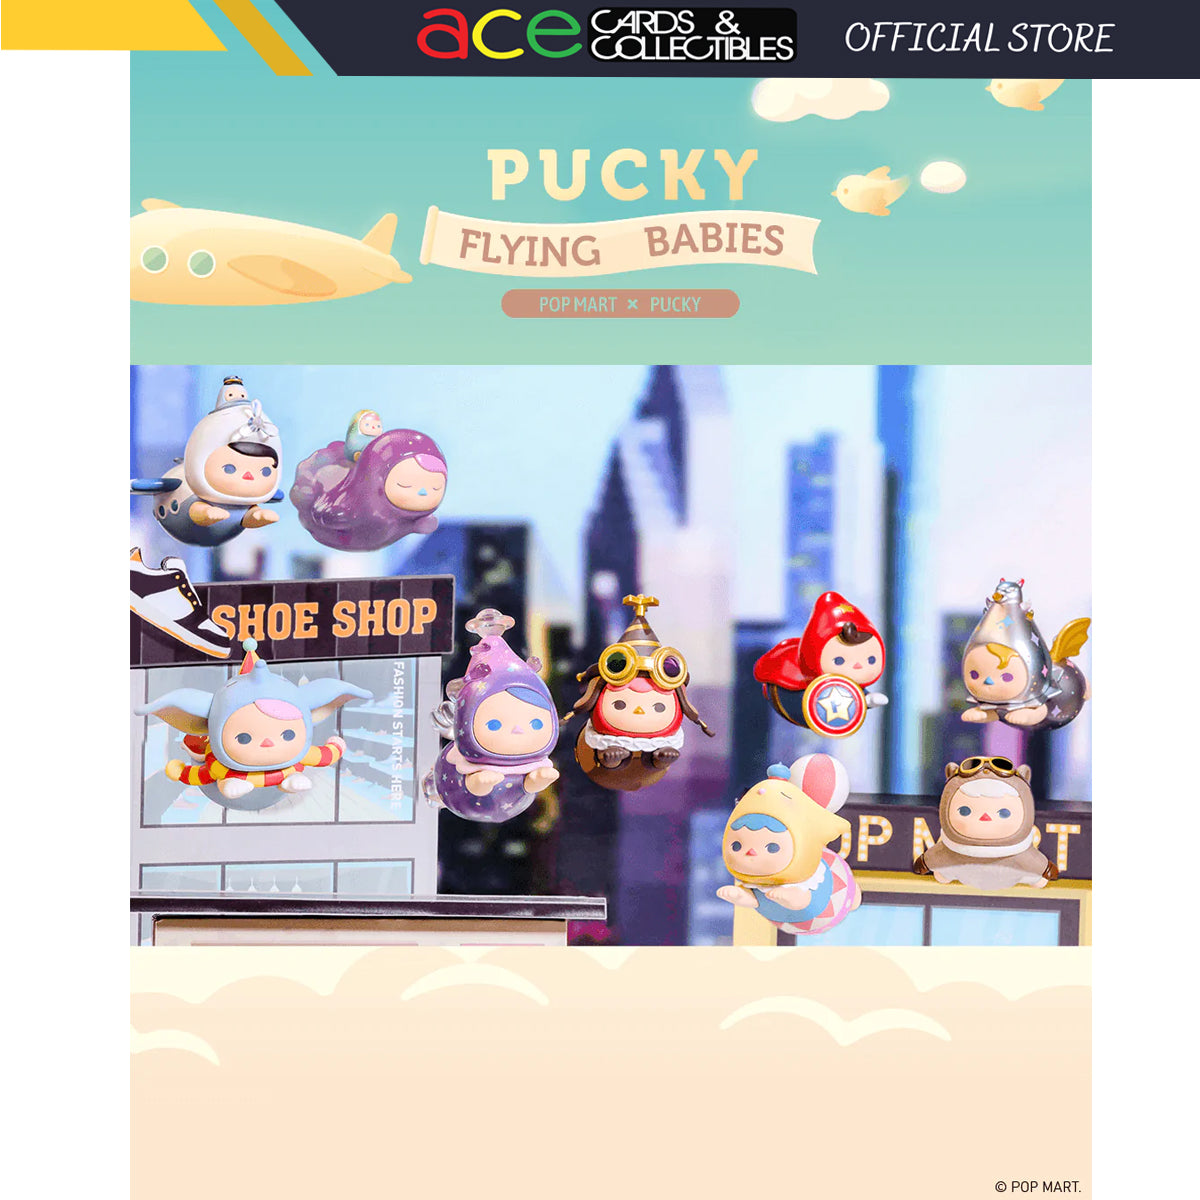 POP MART Pucky Flying Babies Series-Single Box (Random)-Pop Mart-Ace Cards & Collectibles